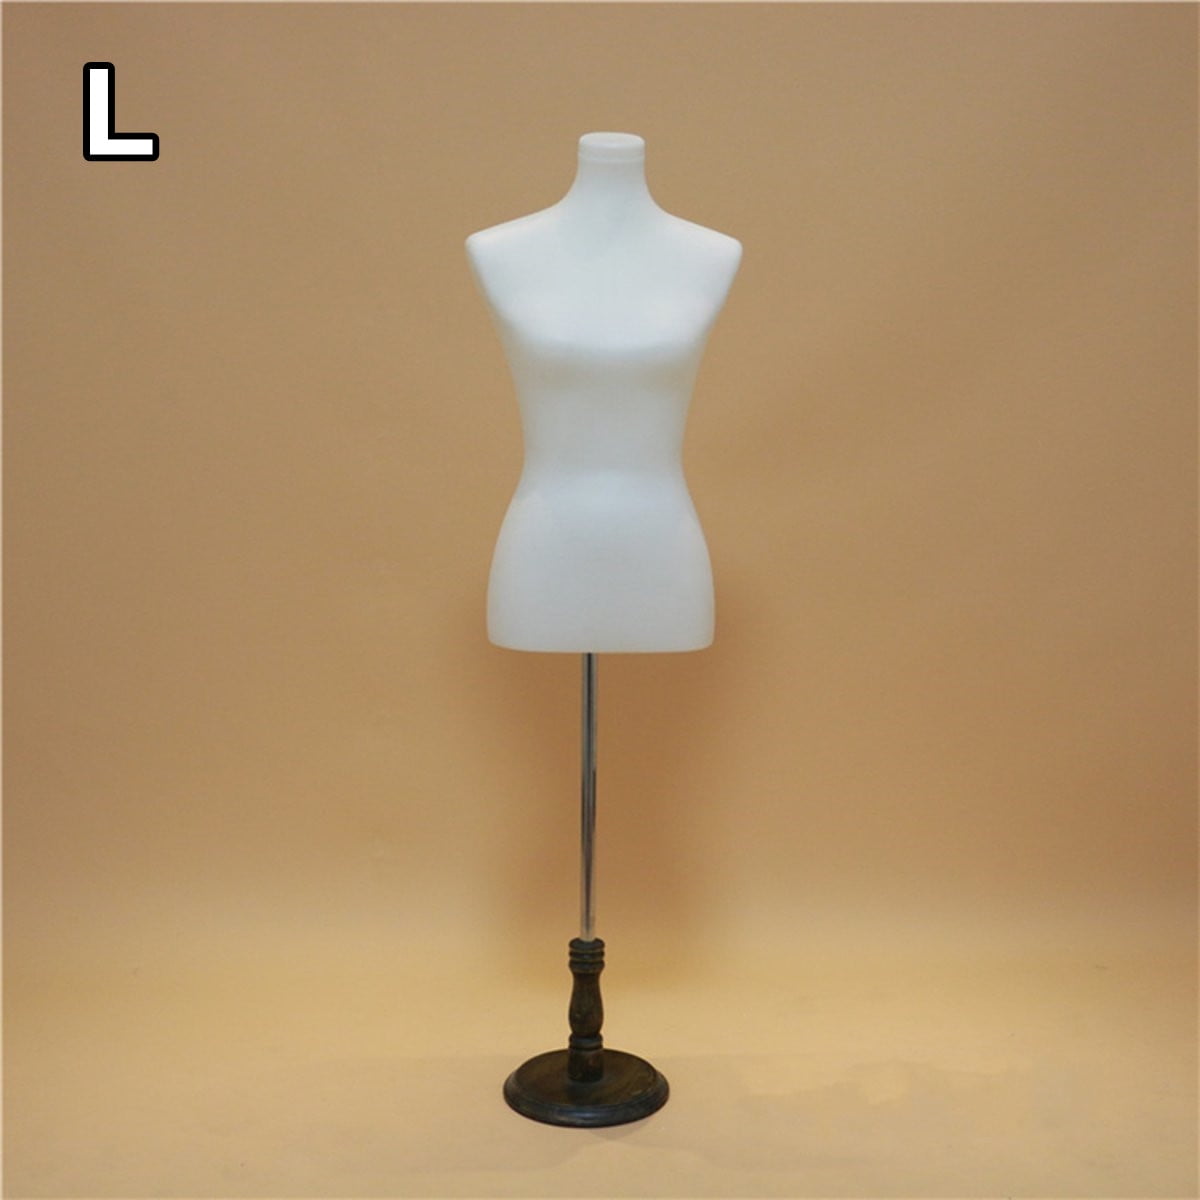 Female Dress Form Pinnable Mannequin Torso Size 10-12 with Round Metal Base 